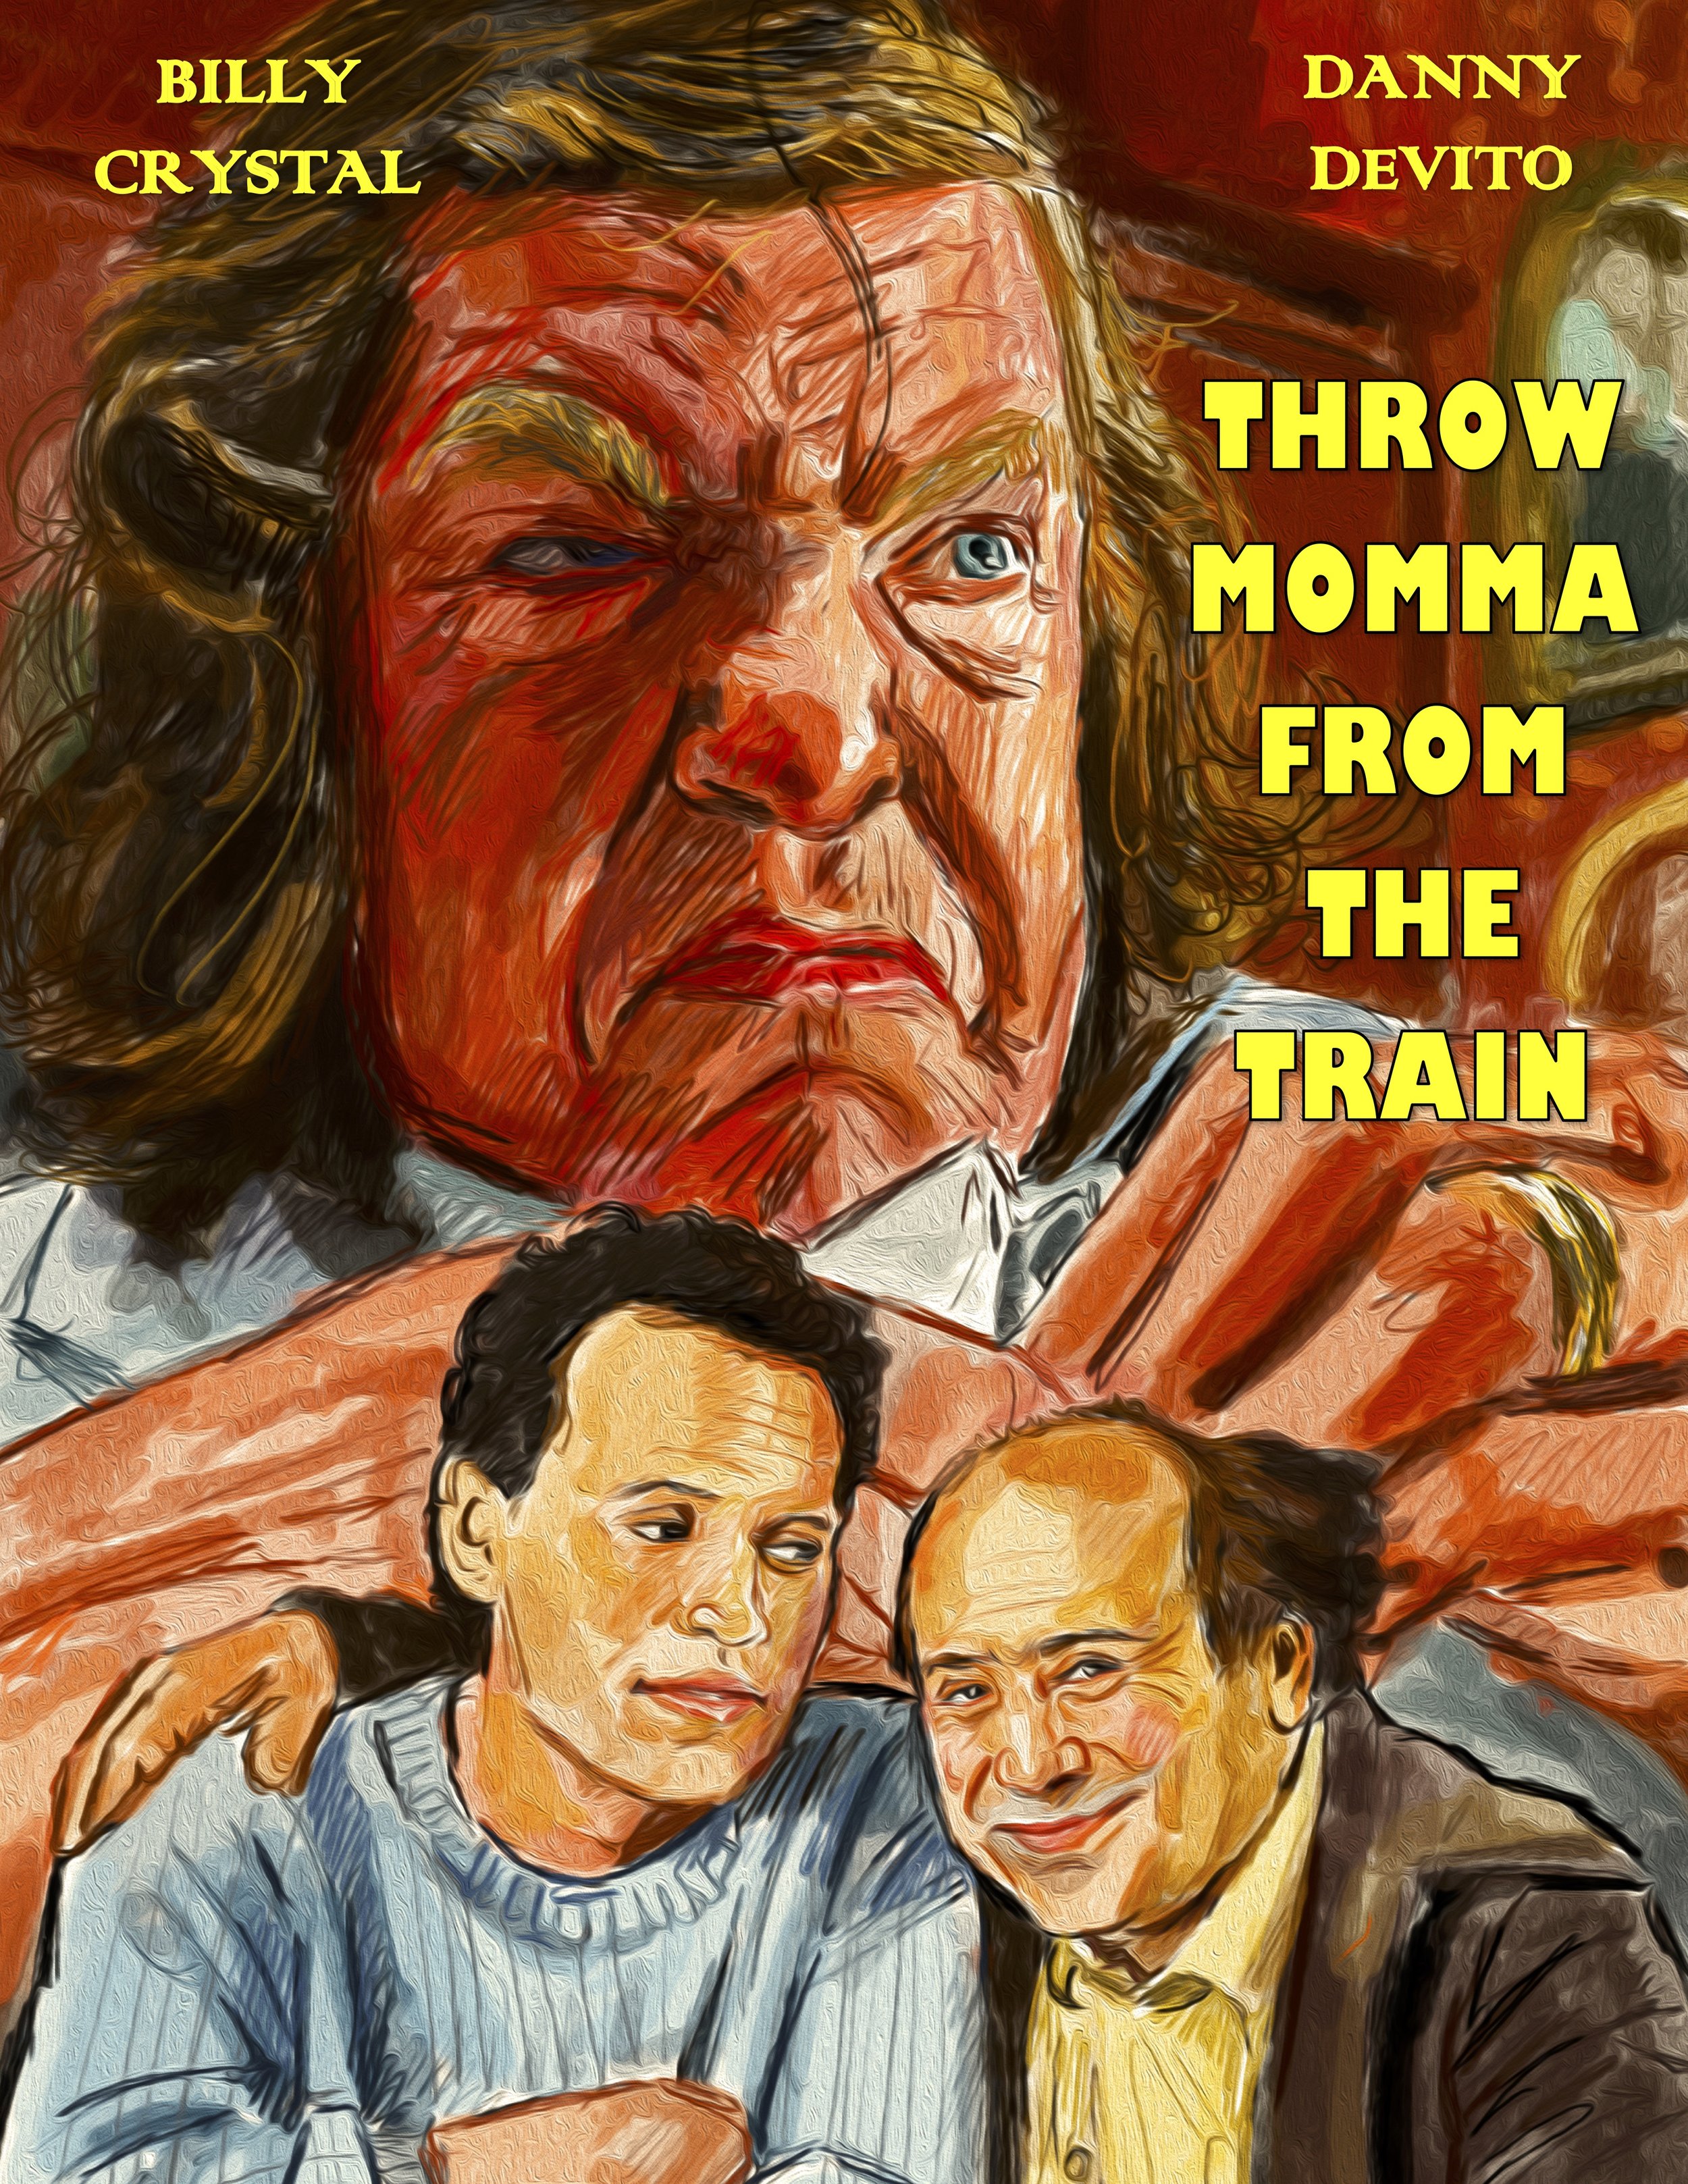 Throw Momma From the Train (1987)